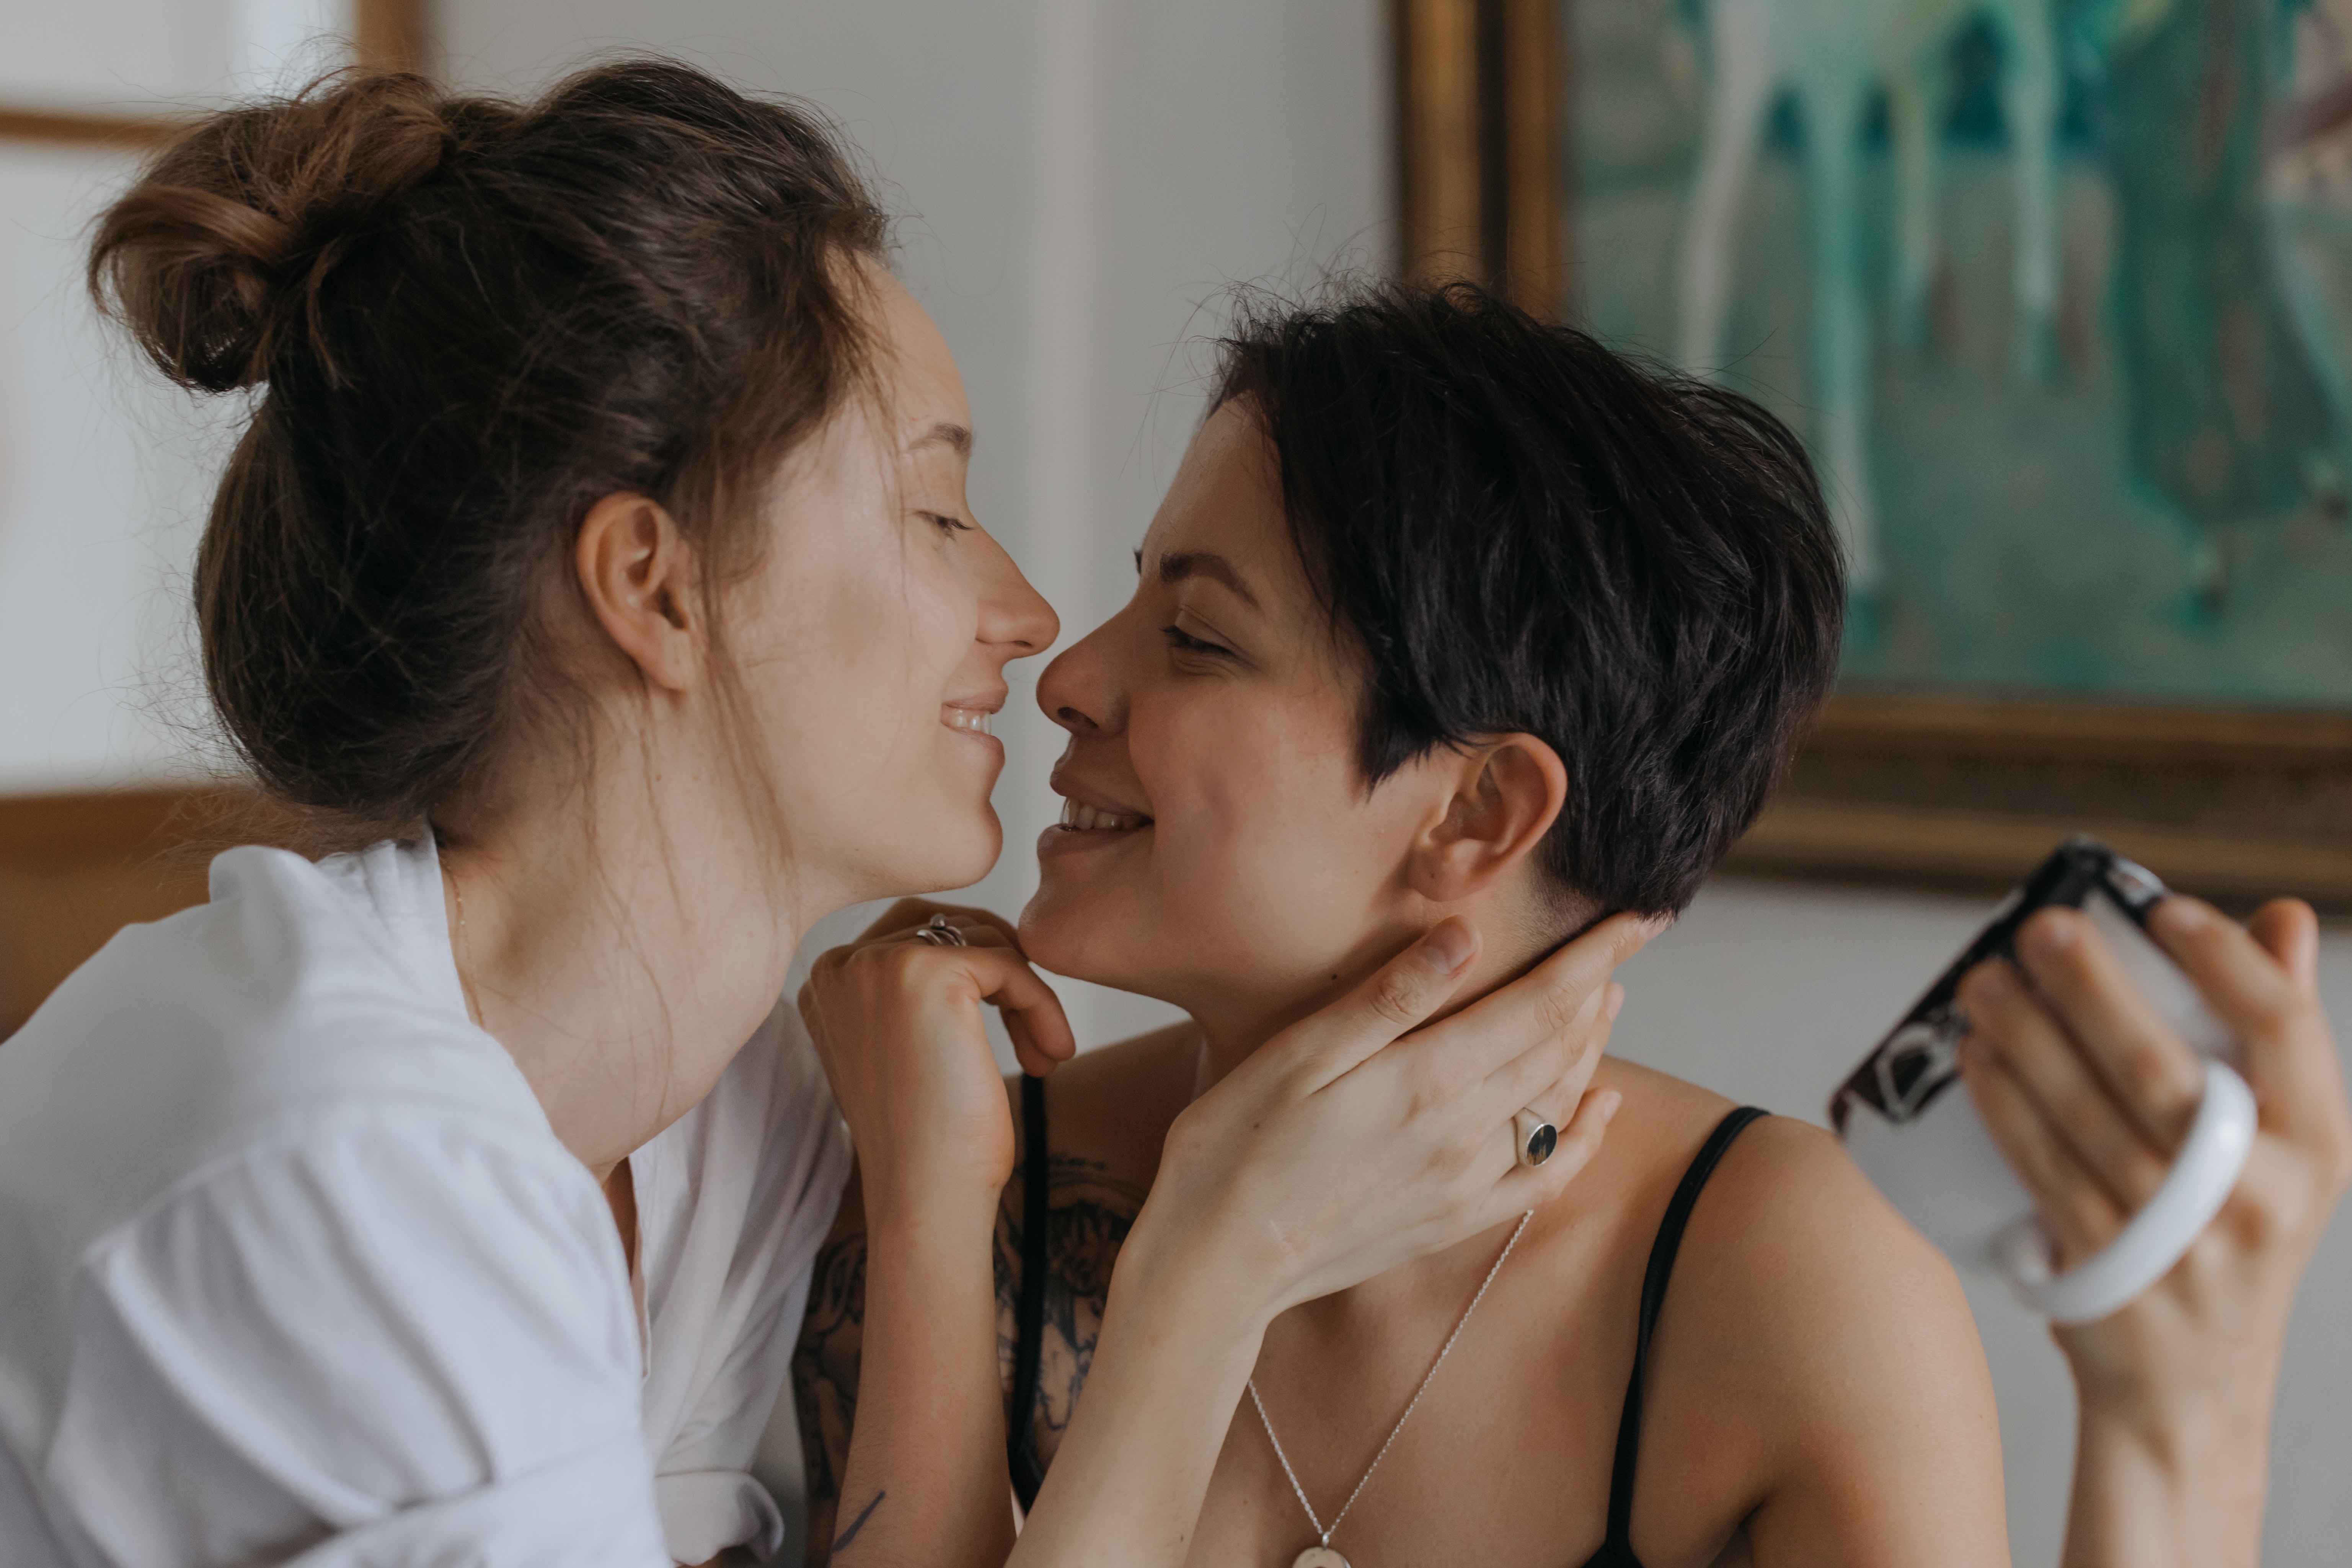 Two women, one with long the other with short hair, have their morning coffee and go in for a kiss.